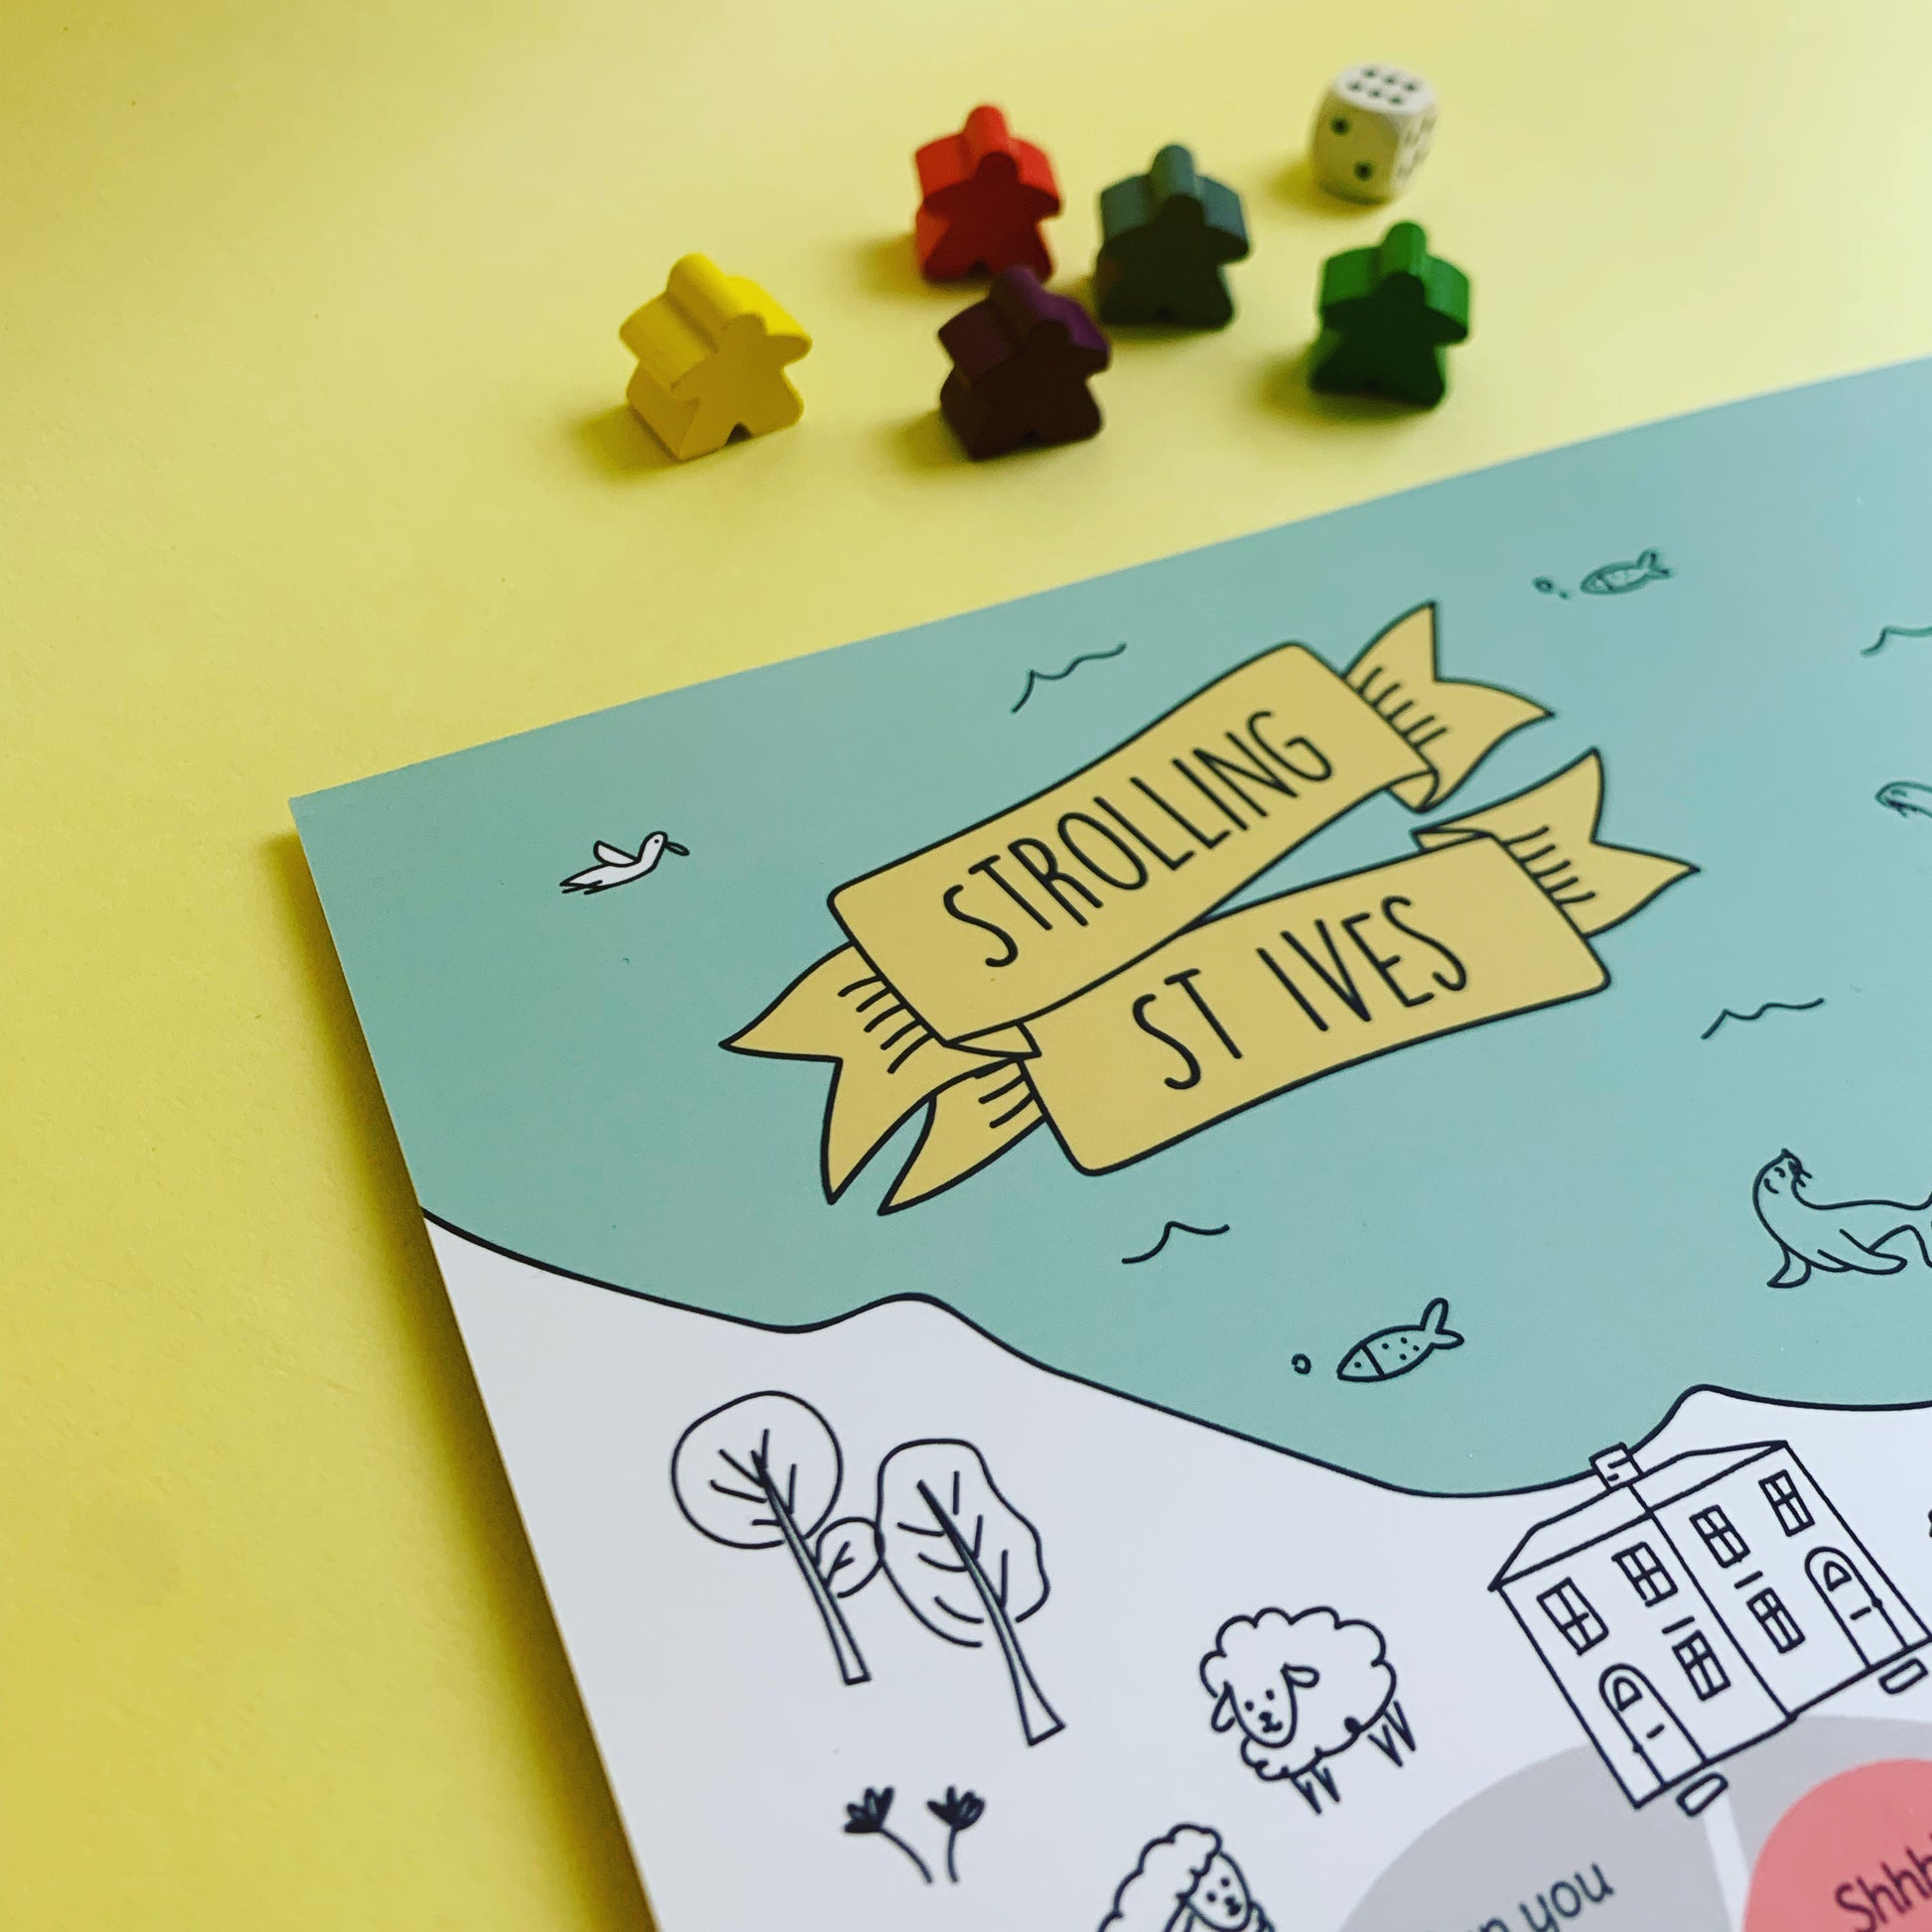 St ives board game detail with plastic free wooden and dice on yellow background.